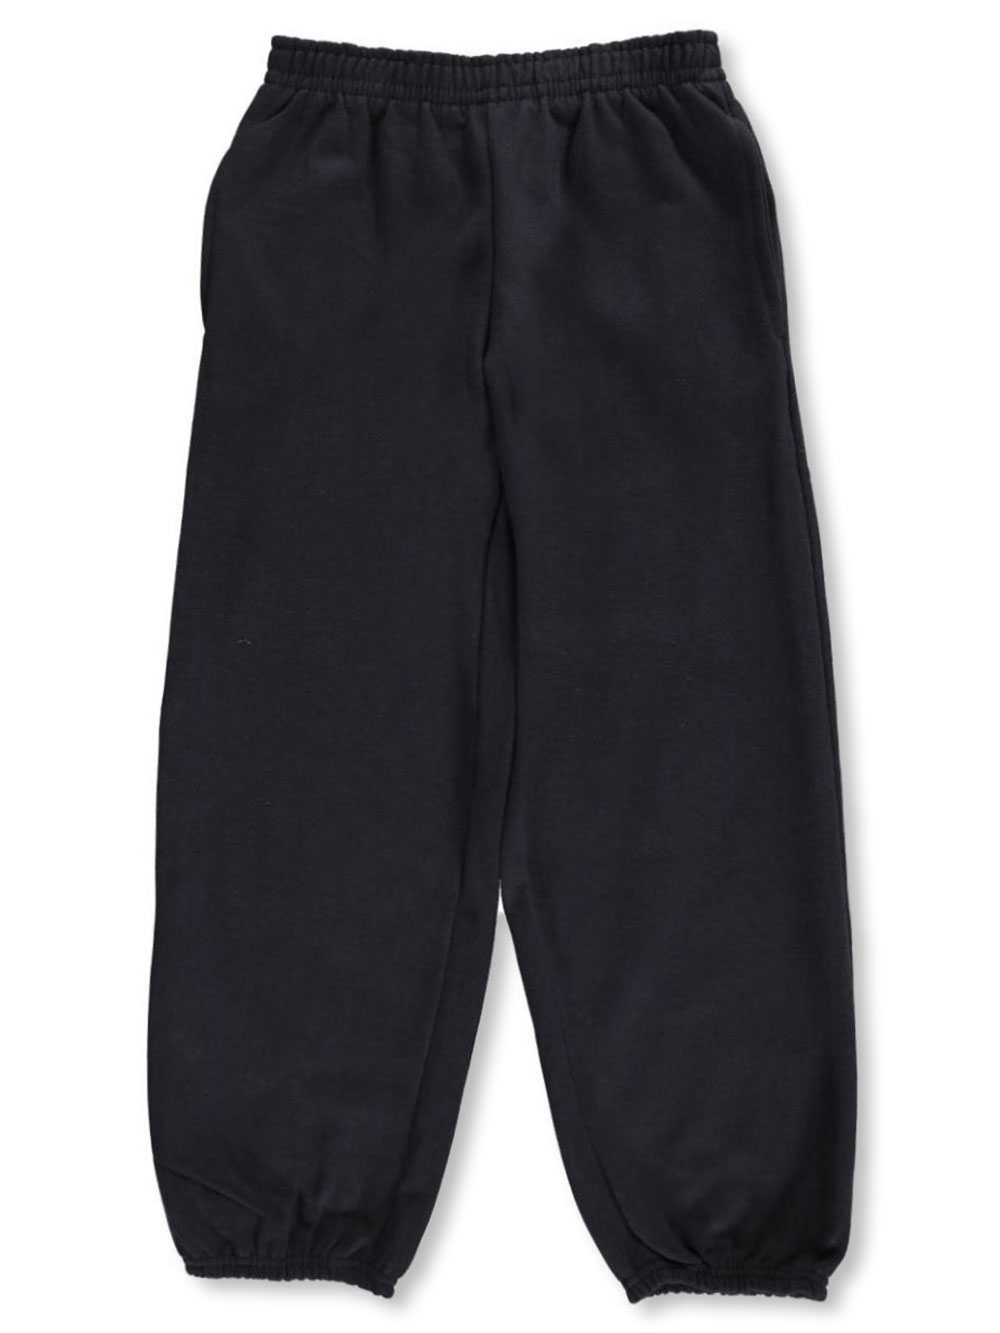 Size 16-18 Sweatpants for Boys